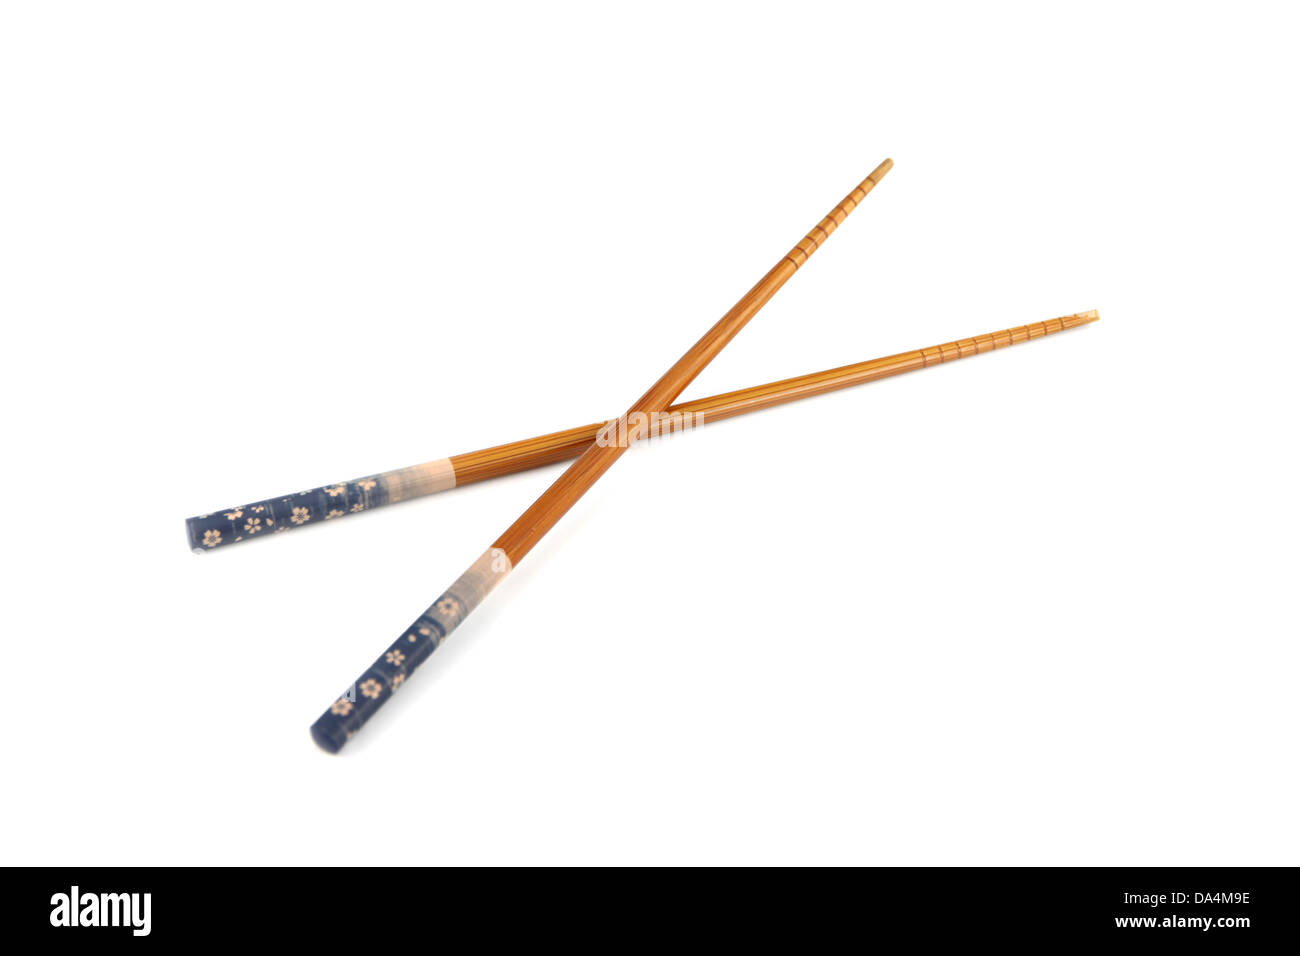 The Chopsticks of China used Cubed food. Stock Photo